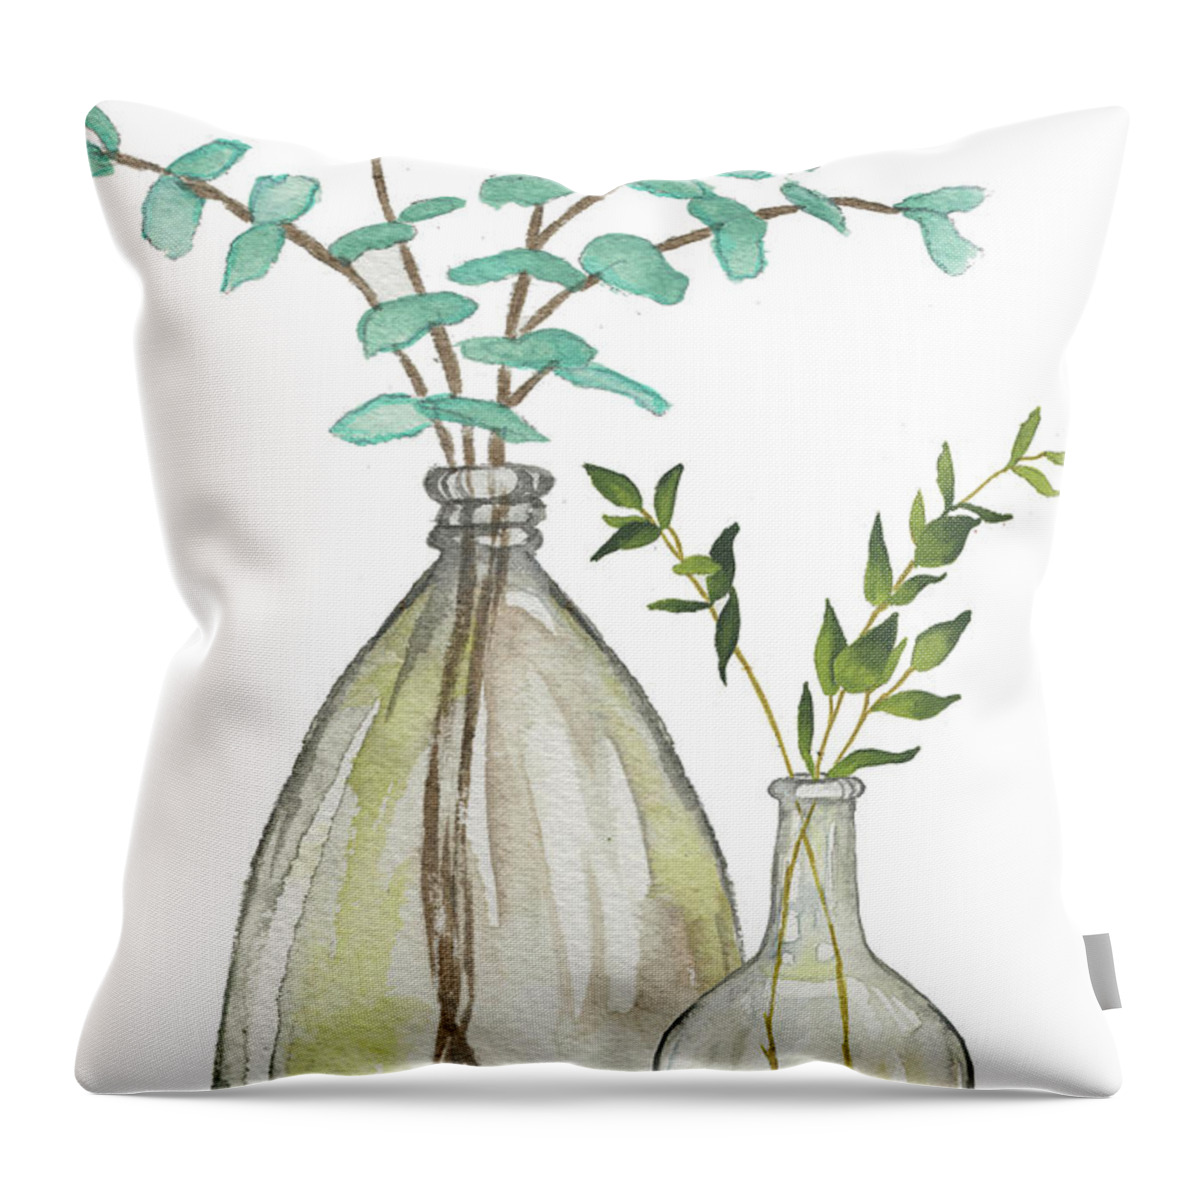 Serenity Throw Pillow featuring the mixed media Serenity Accents II by Elizabeth Medley